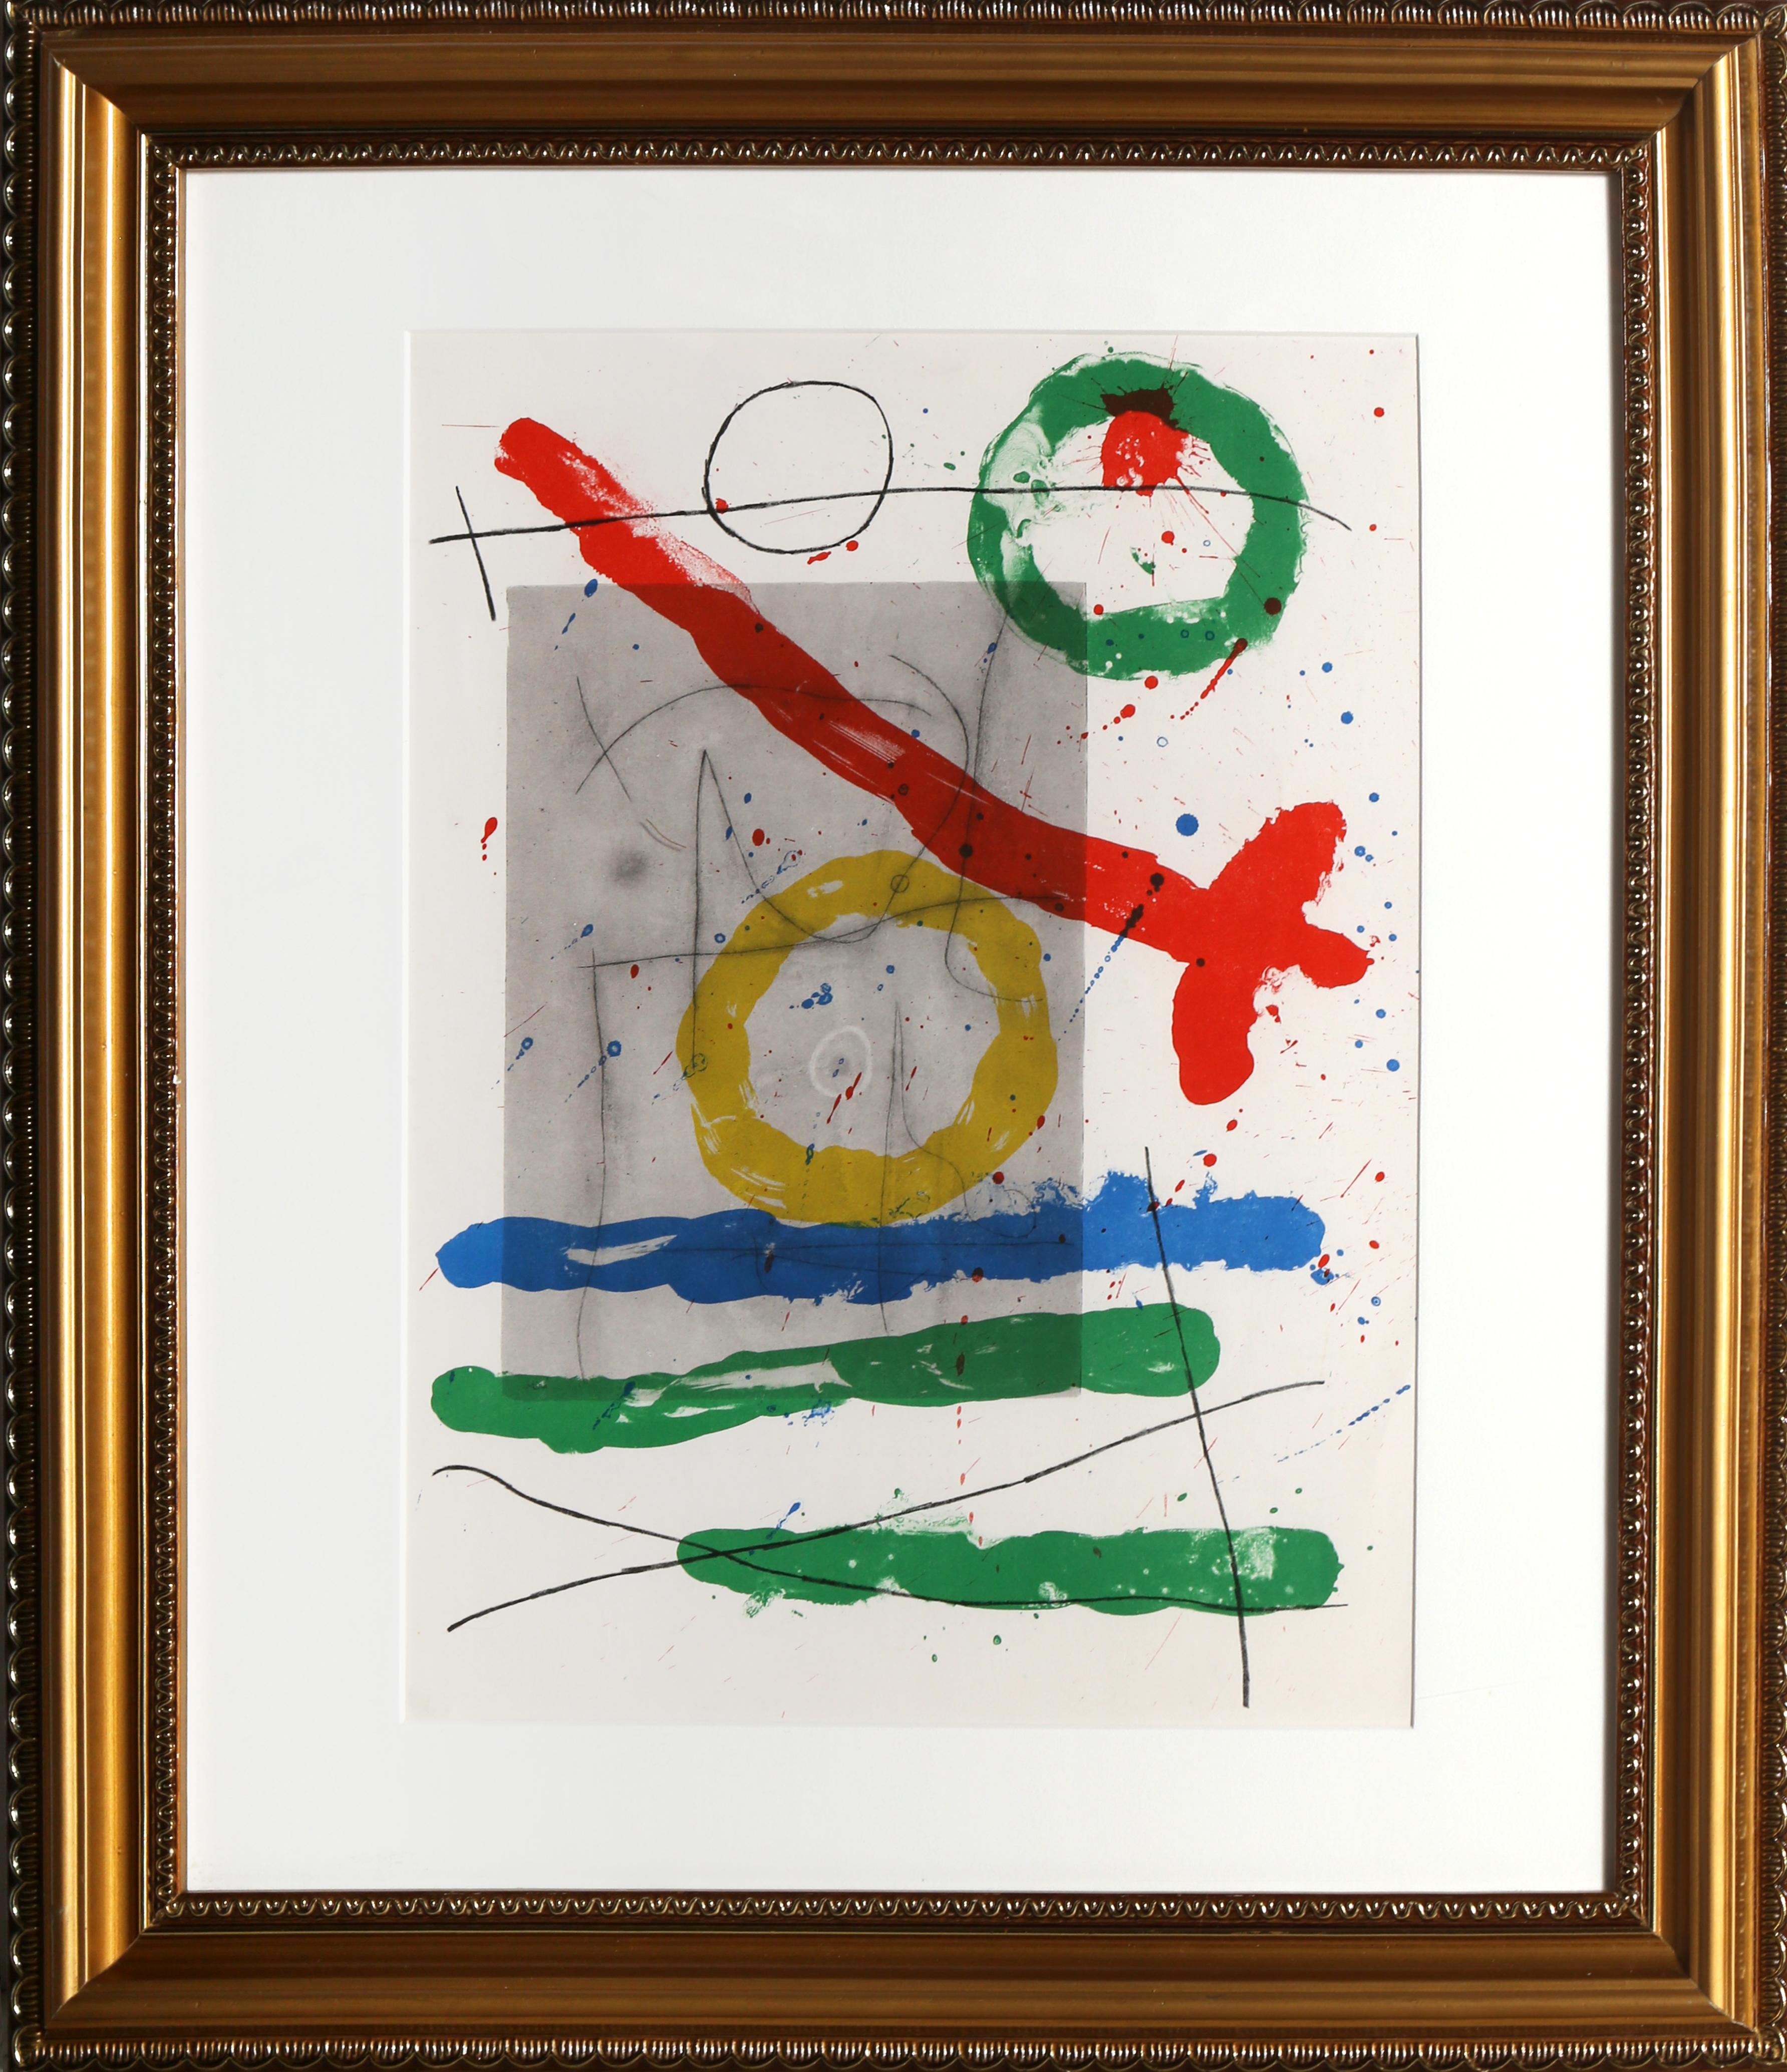 Joan Miró Abstract Print - Cartons from Derriere Le Miroir, Framed Modern Lithograph by Joan Miro